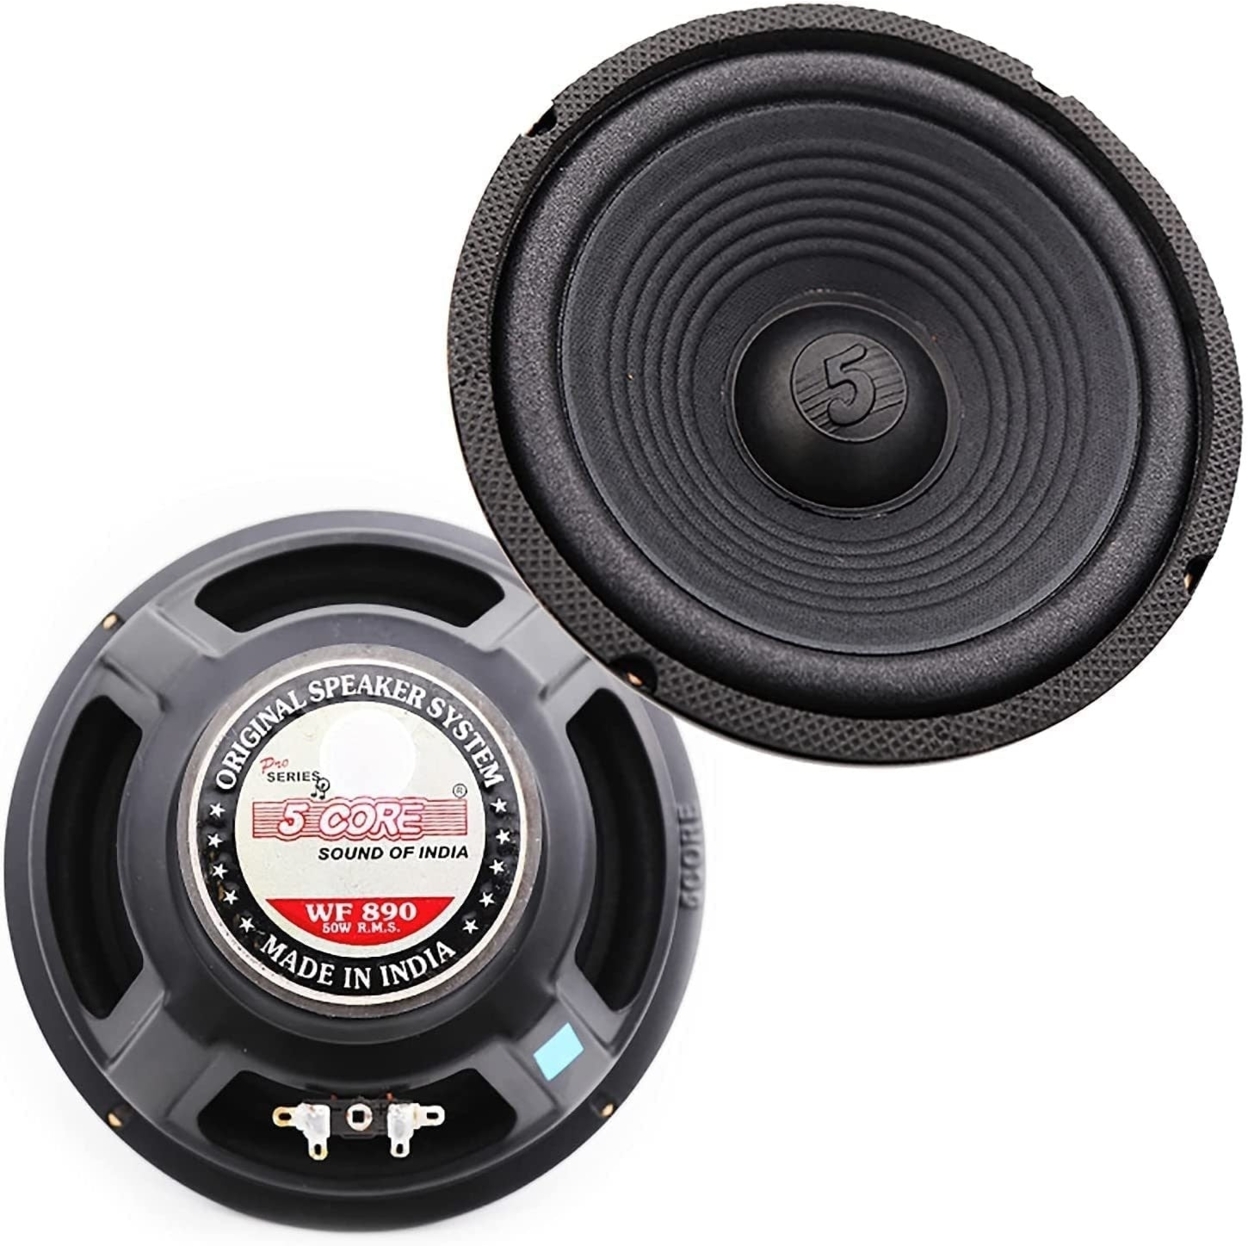 Replacement 8" Woofer Speaker 13 Oz Magnet 500W PMPO Car Home Audio STEREO 4 Ohm - image 1 of 7